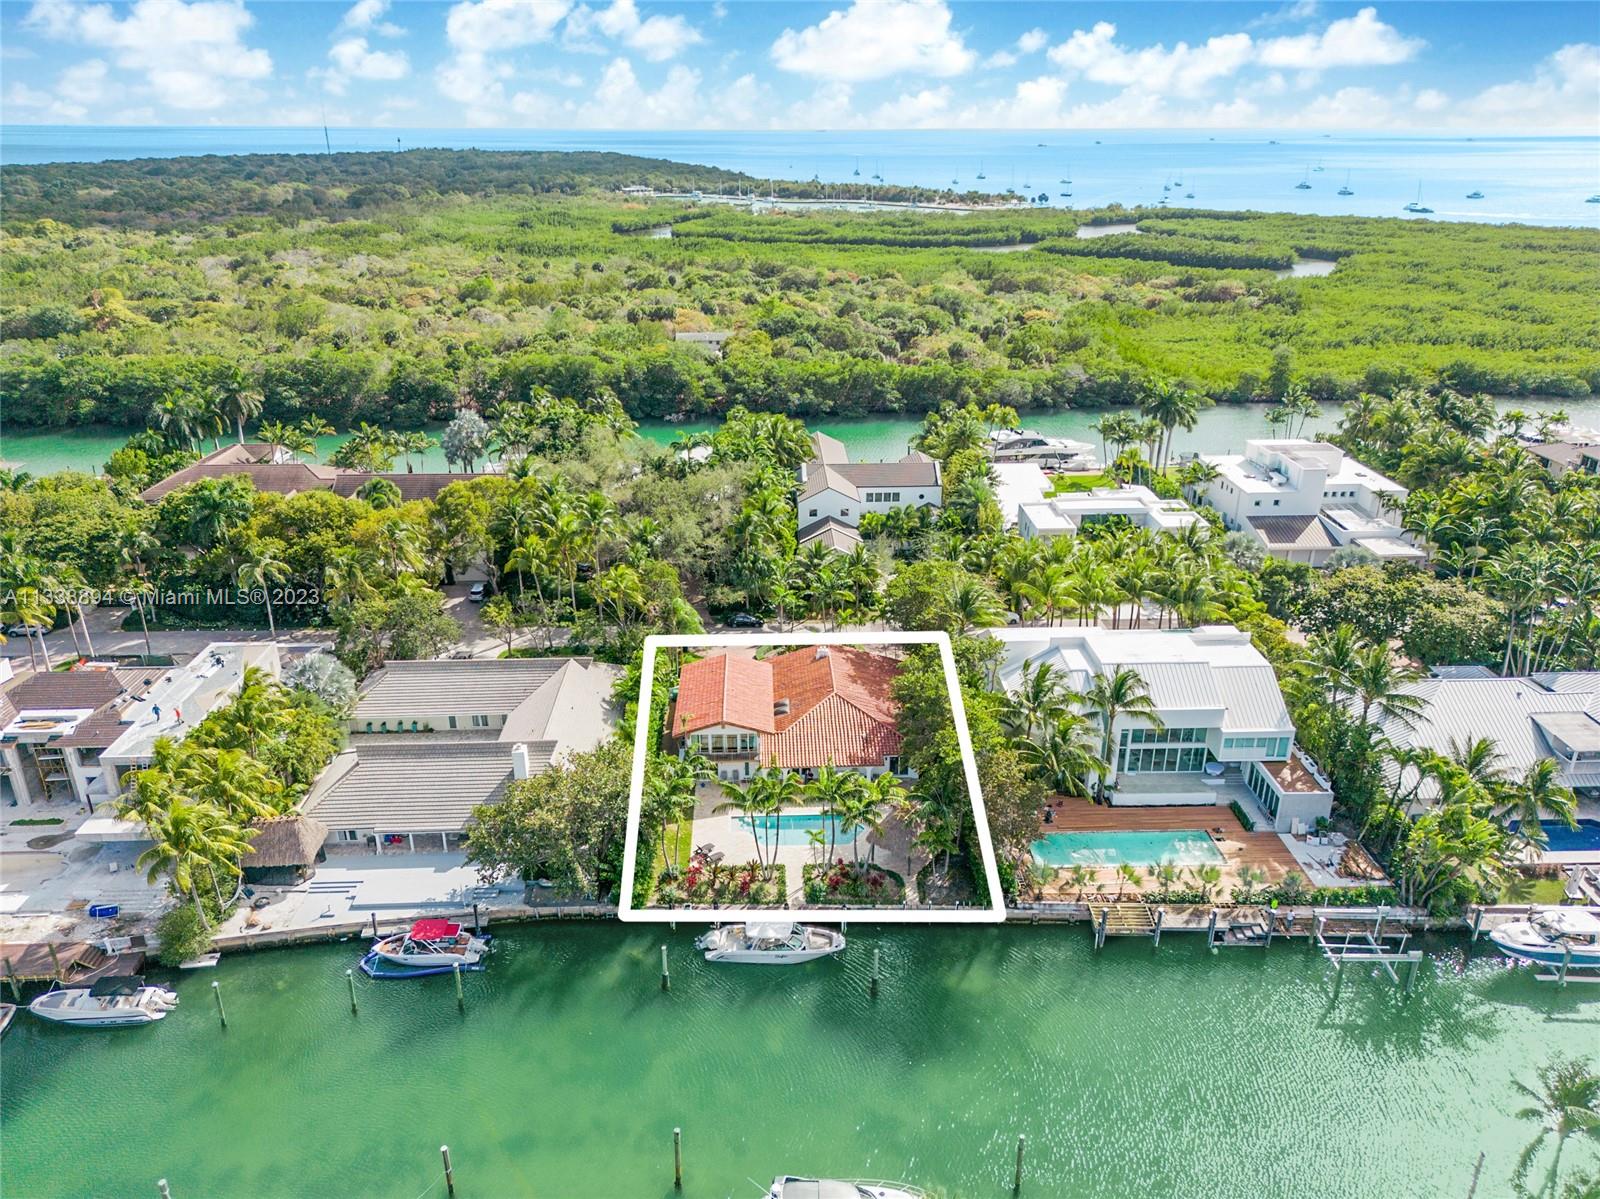 Best waterfront value on Key Biscayne! No bridges to bay & 88 feet on the water.  Accommodates large yachts (turning basin).  This lovingly maintained home on a no-traffic street is in excellent condition.  This property is an excellent value surrounded by homes in the $20-$30 million plus range. Excellent home for entertaining with pool, generous patio area and gazebo by the water!  Impact windows throughout.  Ultra secure location at the end of Key Biscayne next to Bill Baggs Cape Florida State Park. Take your boat around the corner for lunch, dinner or drinks at Boater's Grill or The Cleat.  Update and add value, build a modern masterpiece, rent it out for $20,000 plus or move right in to this beautifully maintained ocean access home.  No mangroves or seaweed buildup at this property.